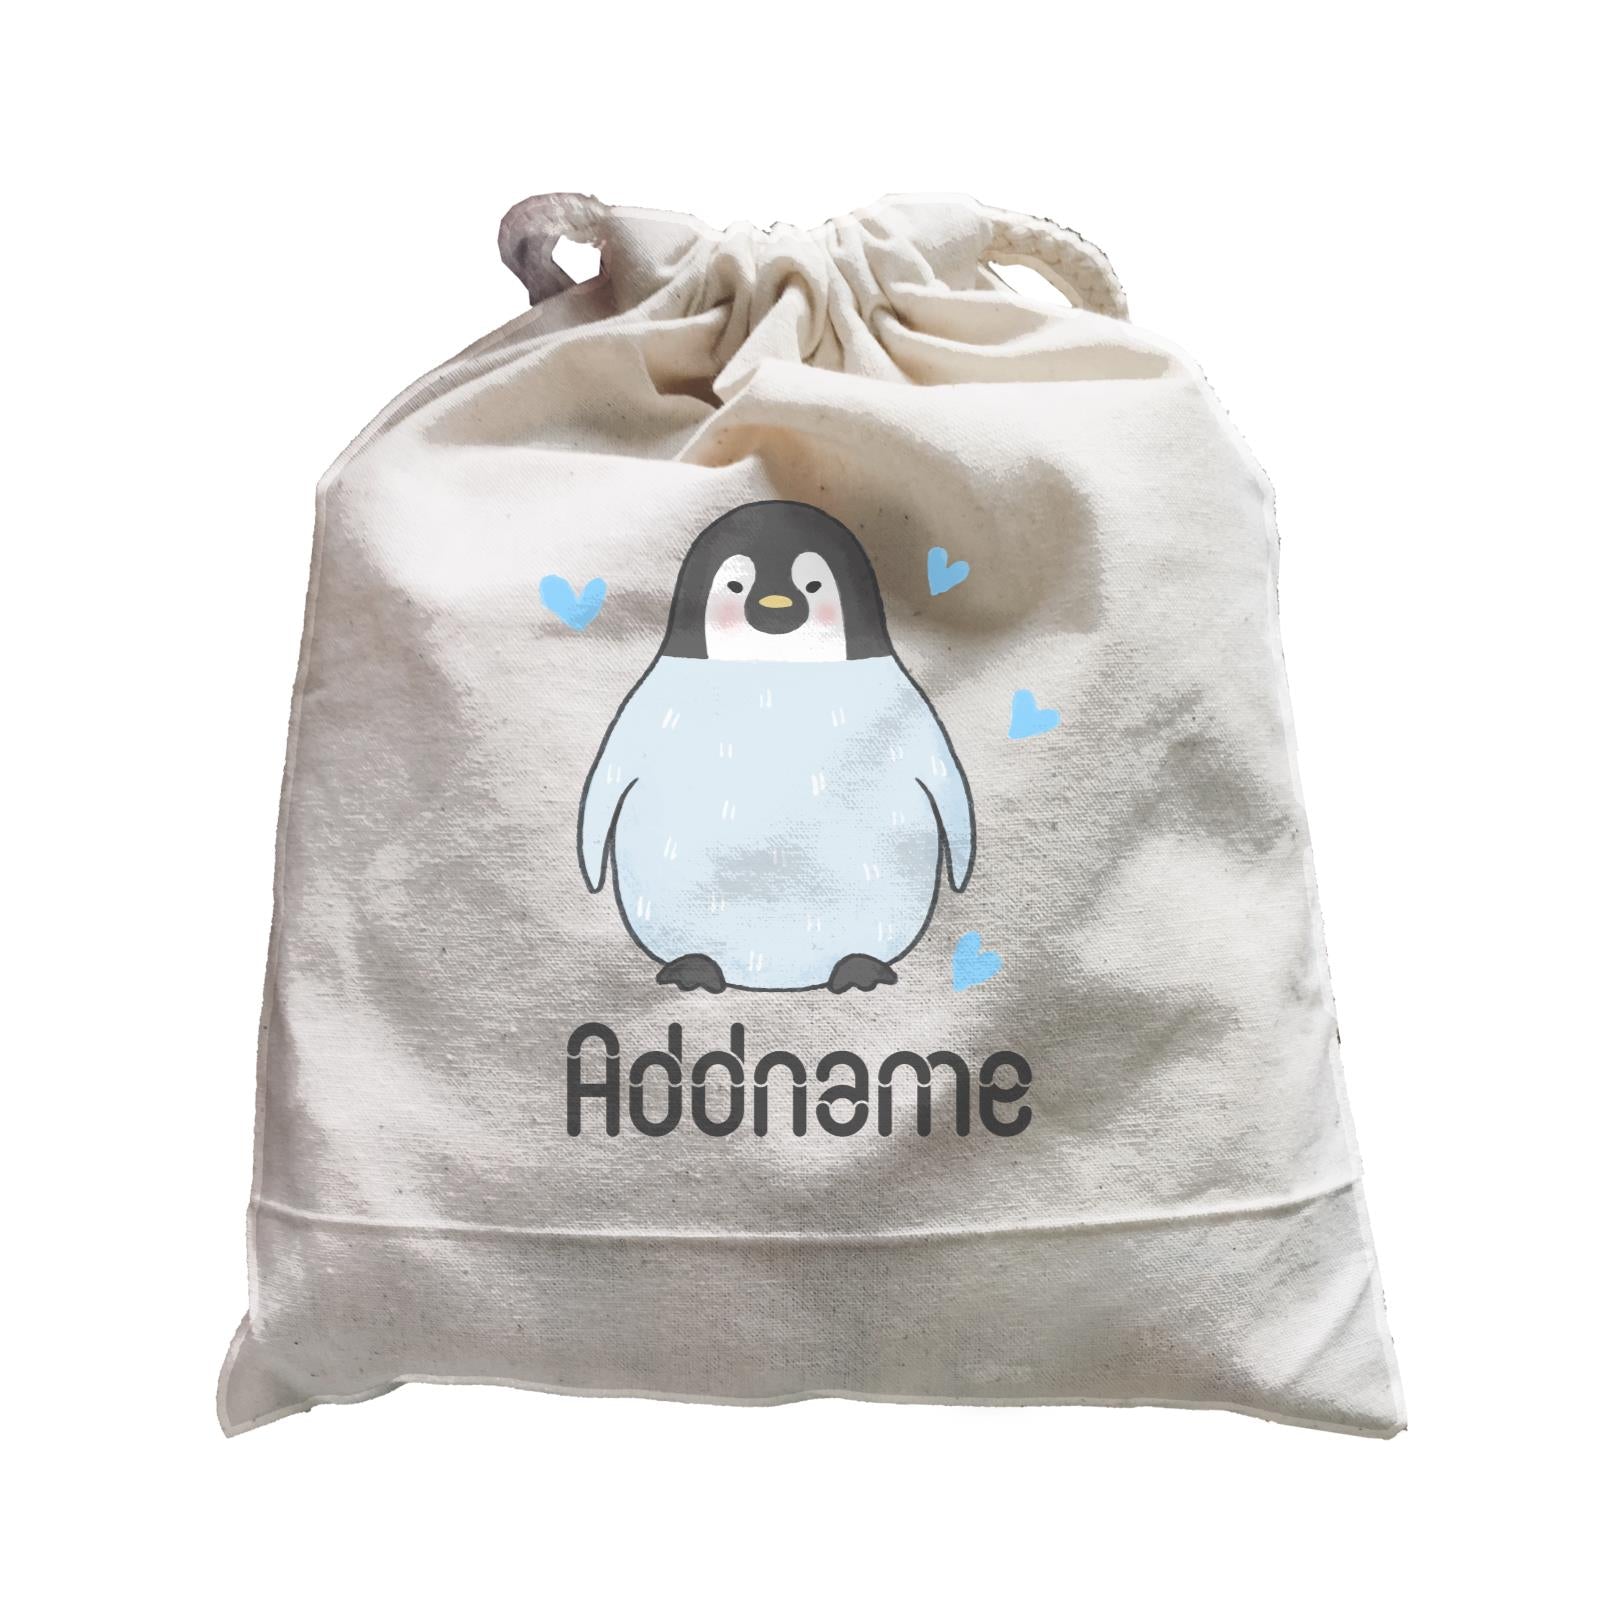 Cute Hand Drawn Style Penguin Addname Satchel